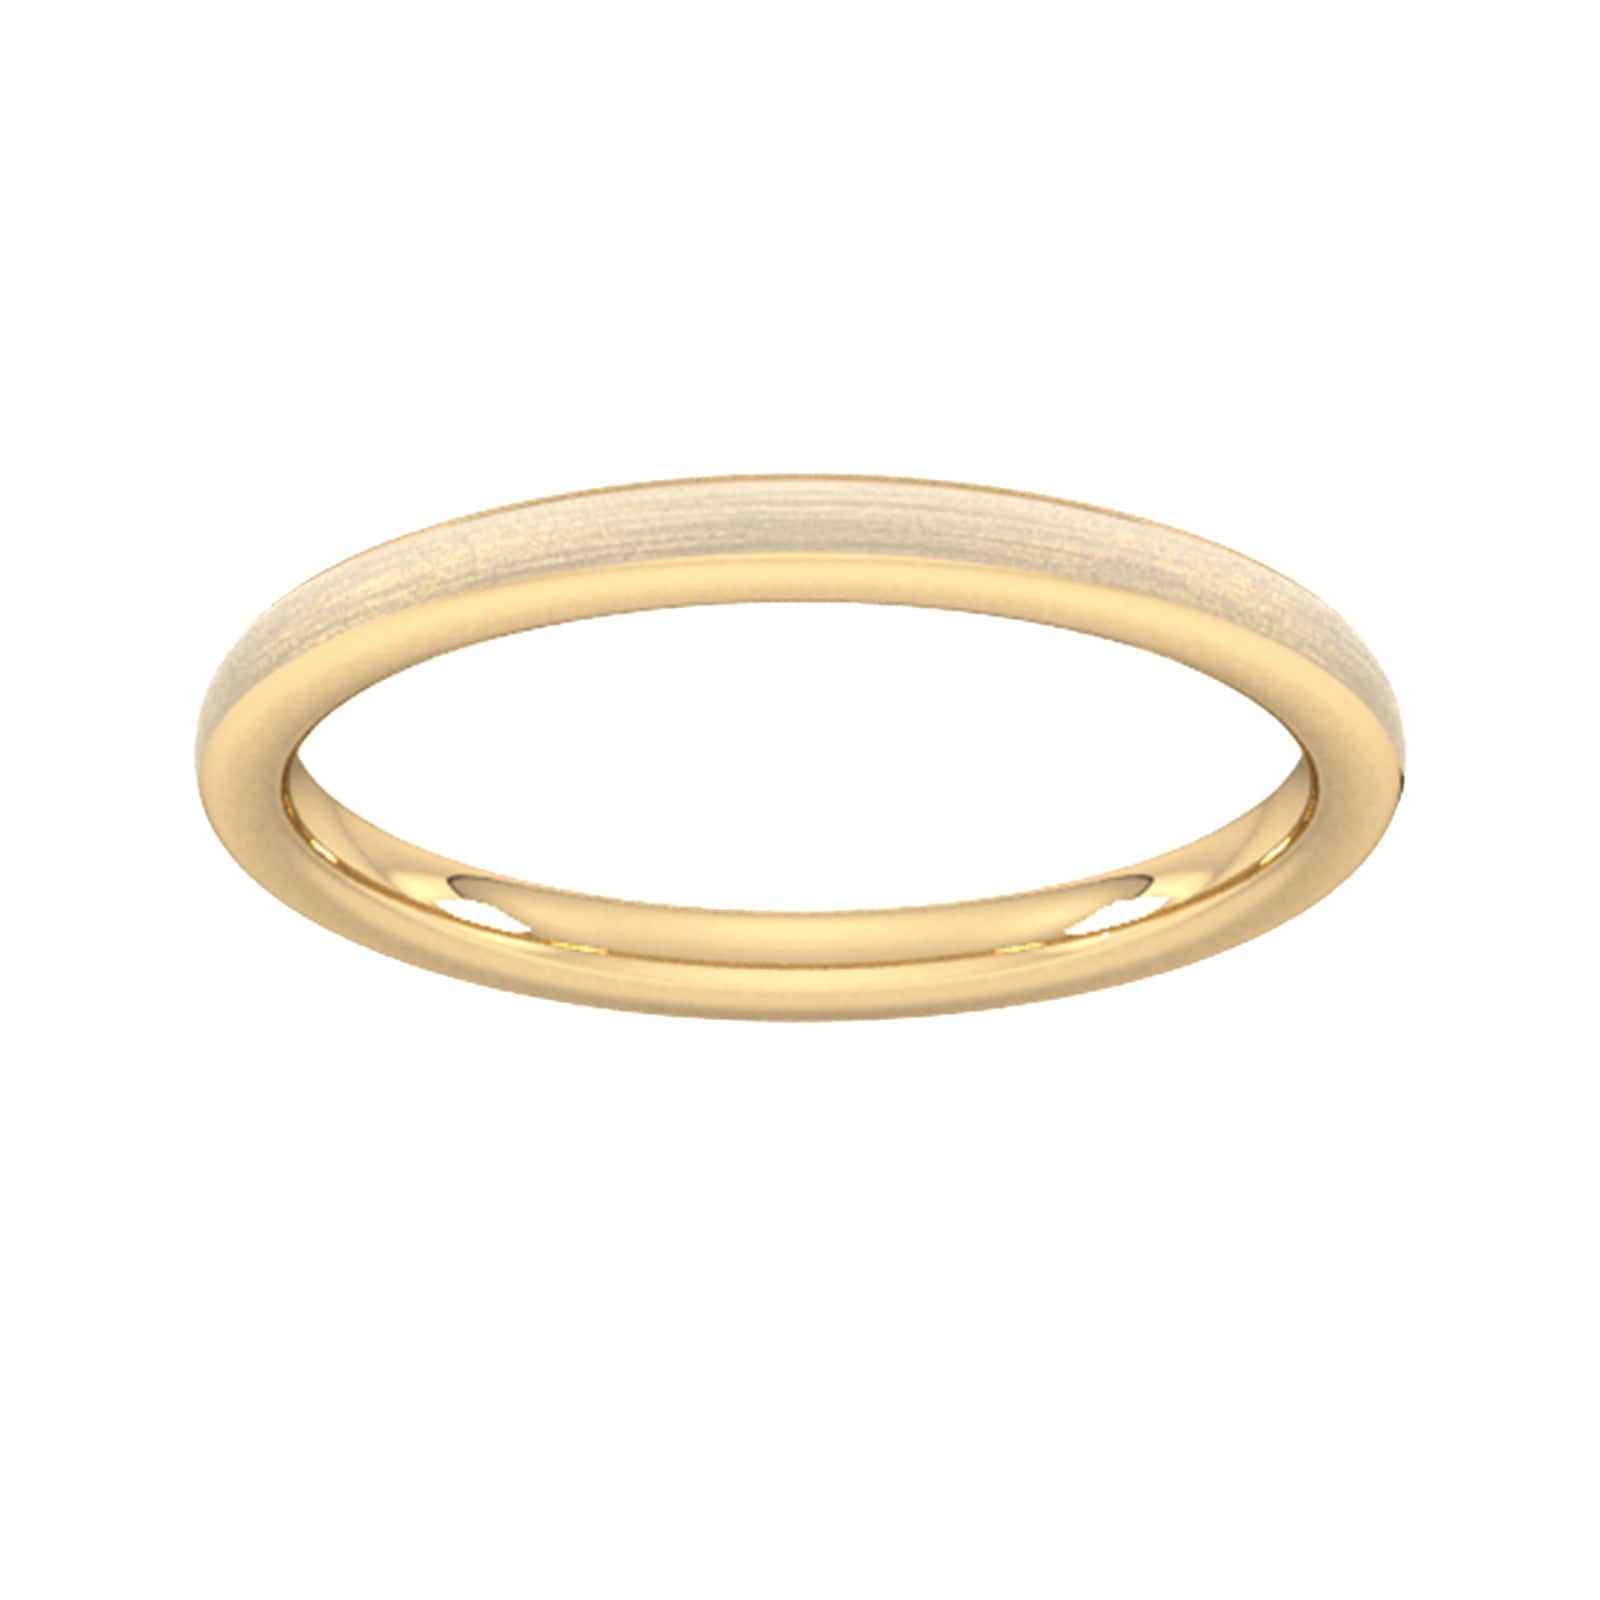 2mm Traditional Court Heavy Matt Finished Wedding Ring In 9 Carat Yellow Gold - Ring Size K